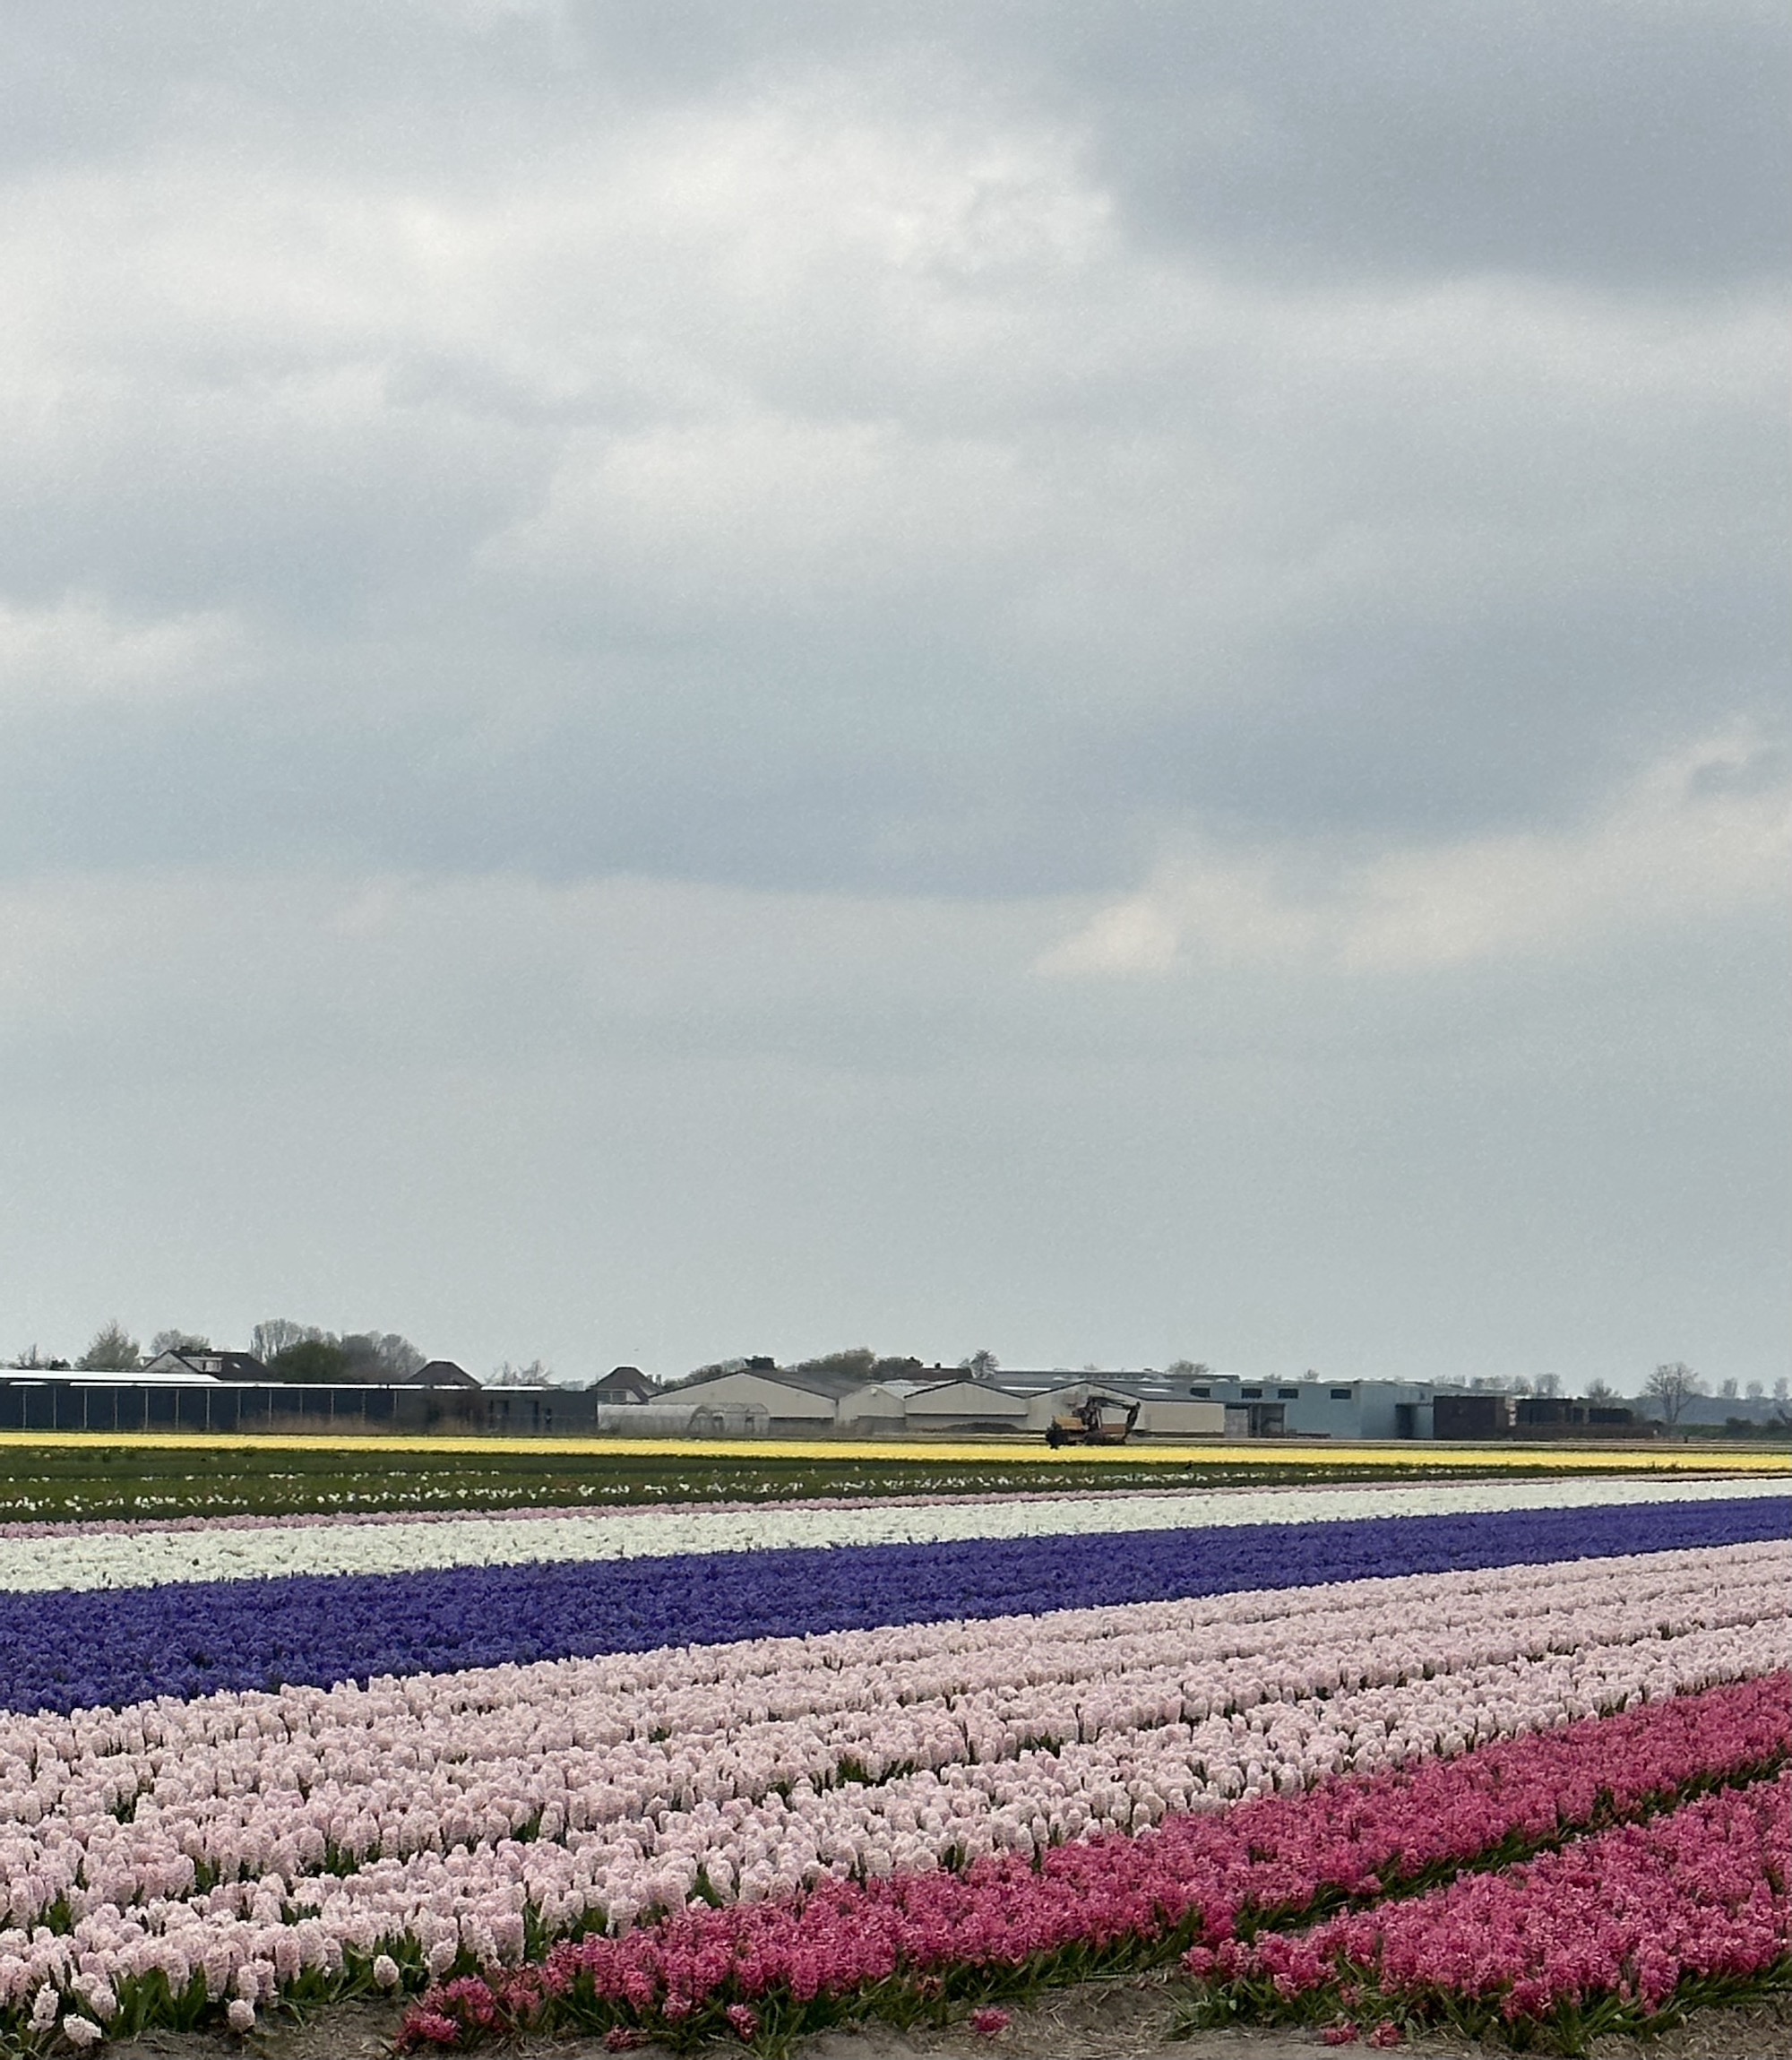 Tulips growing in the netherlands